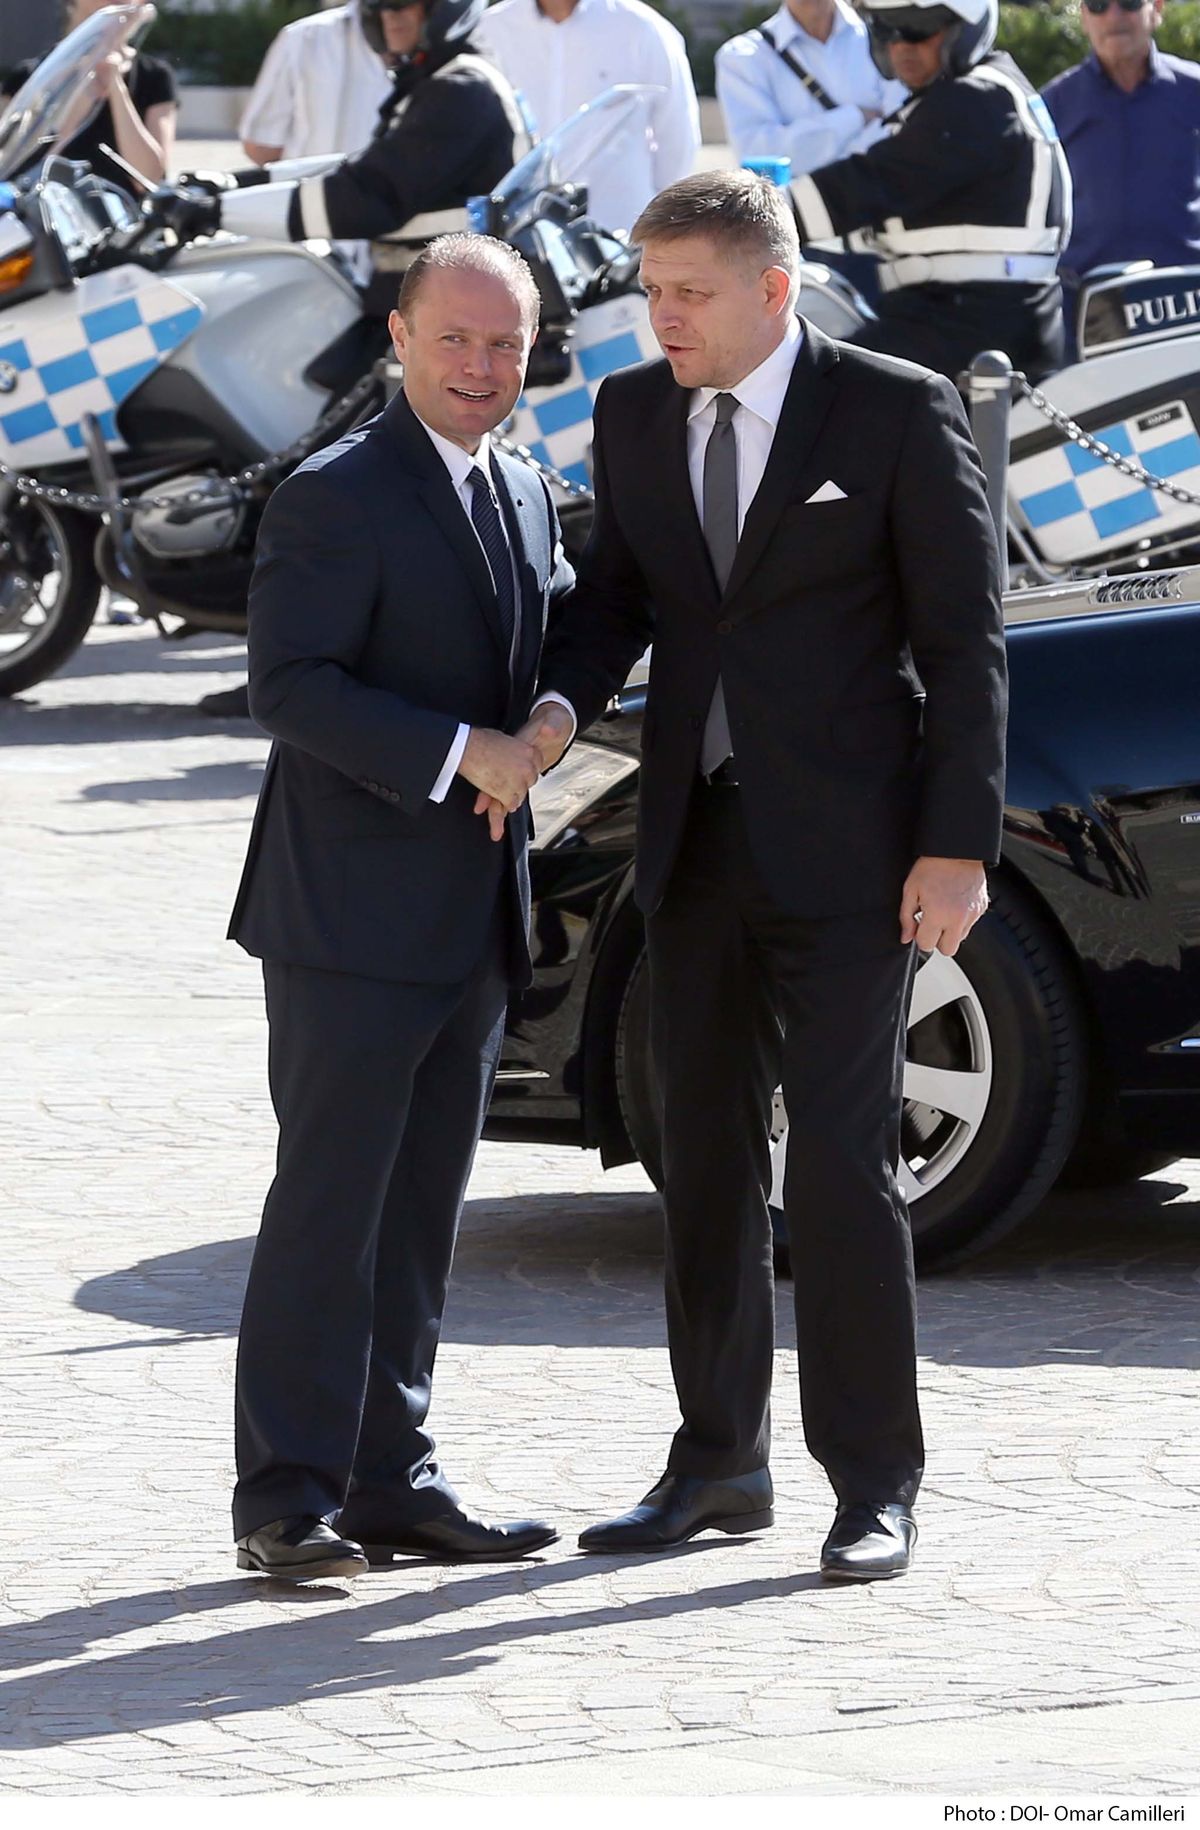 Fico in Malta Presents Slovakia's Proposal on Migration Issue